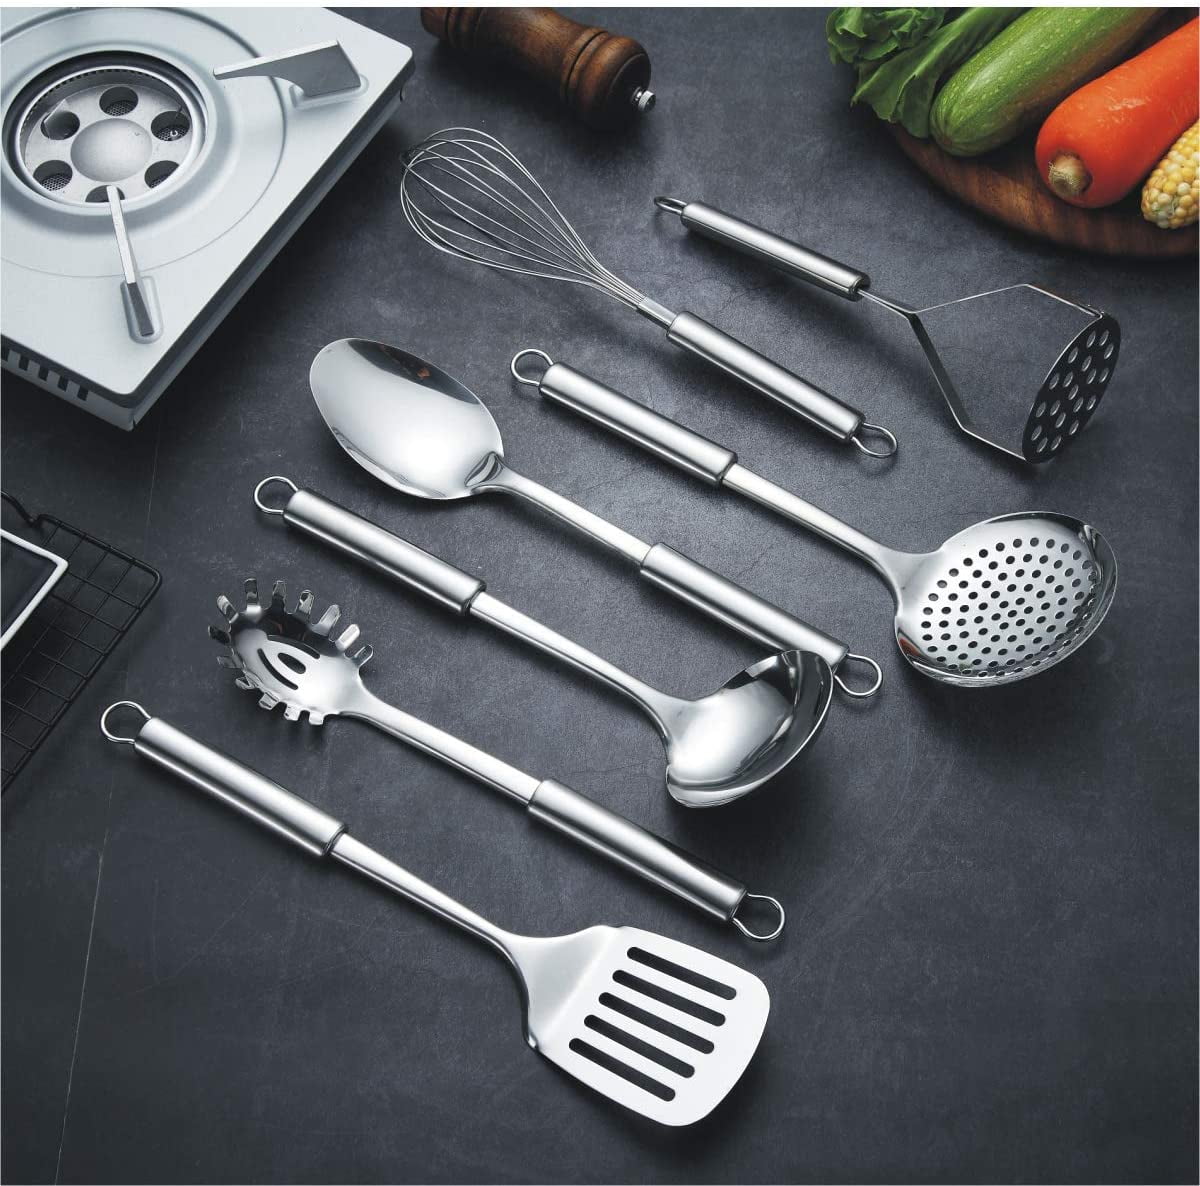 ReaNea 13 Pieces Shiny Stainless Steel Kitchen Utensils Set with Utensil  Holder 